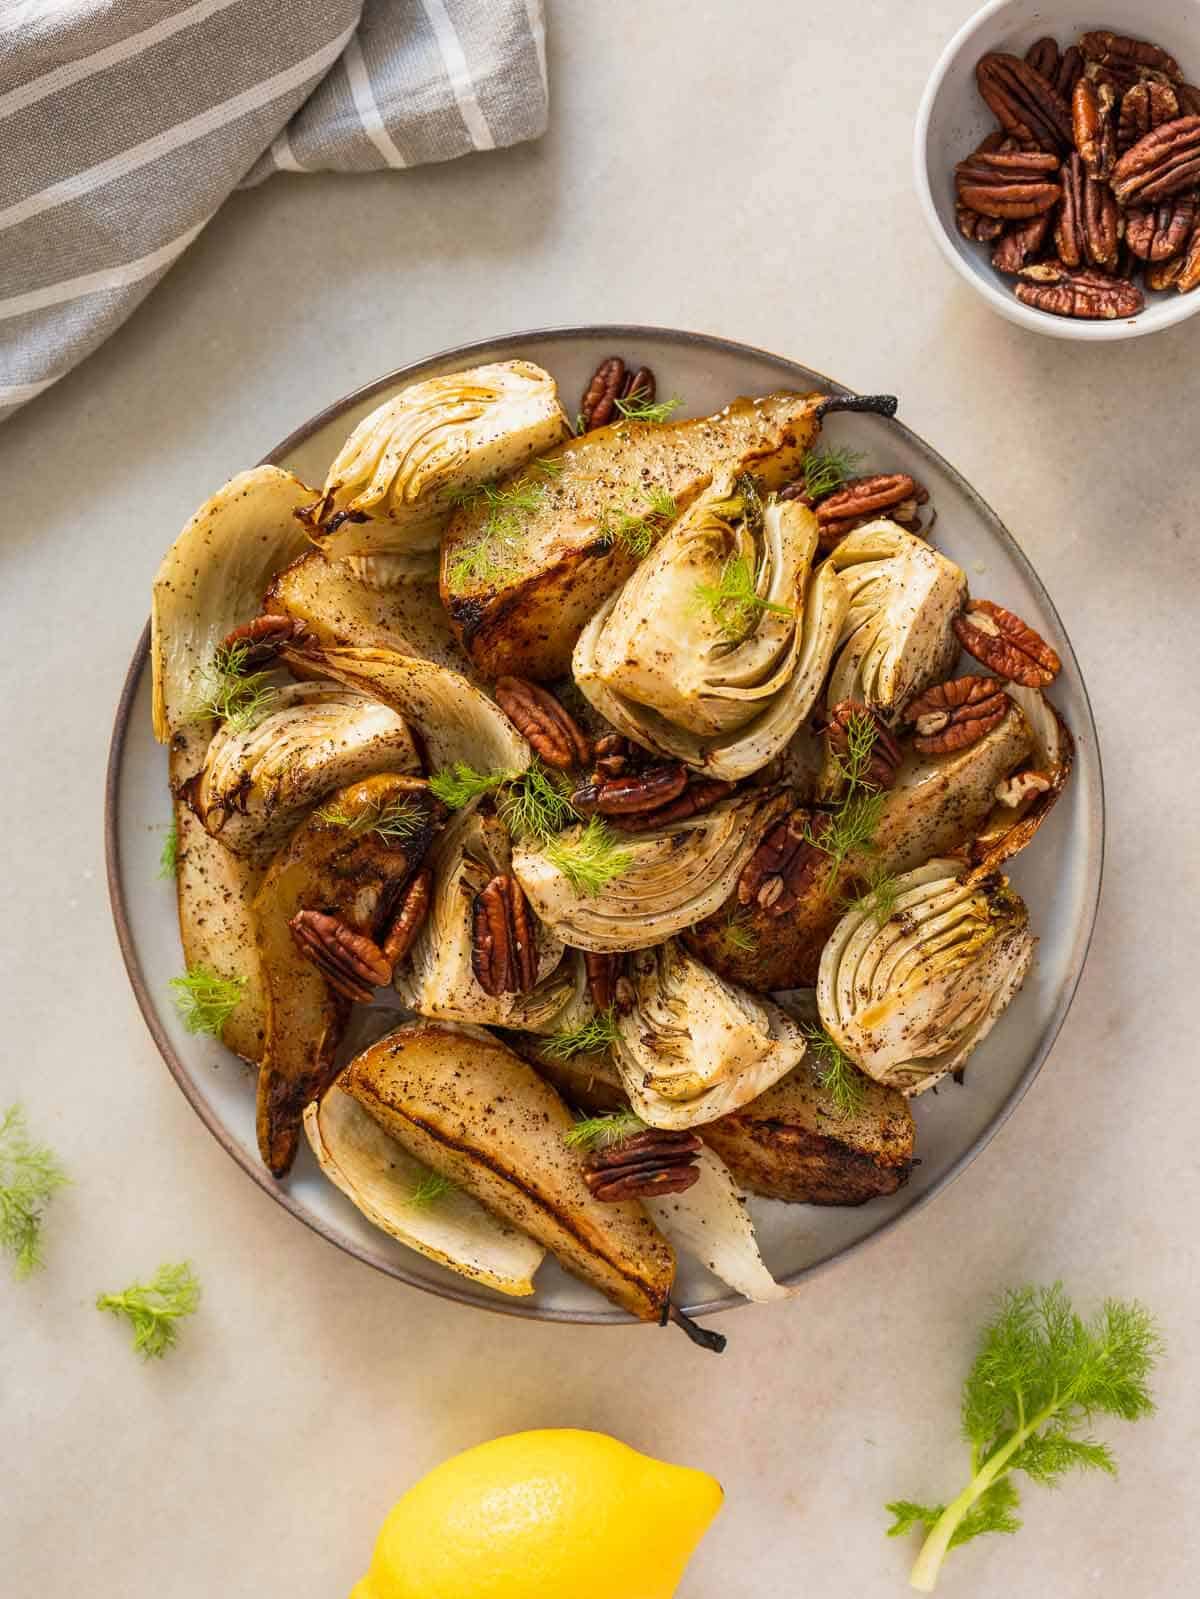 roasted pear and fennel salad served with lemon and extra pecan nuts.